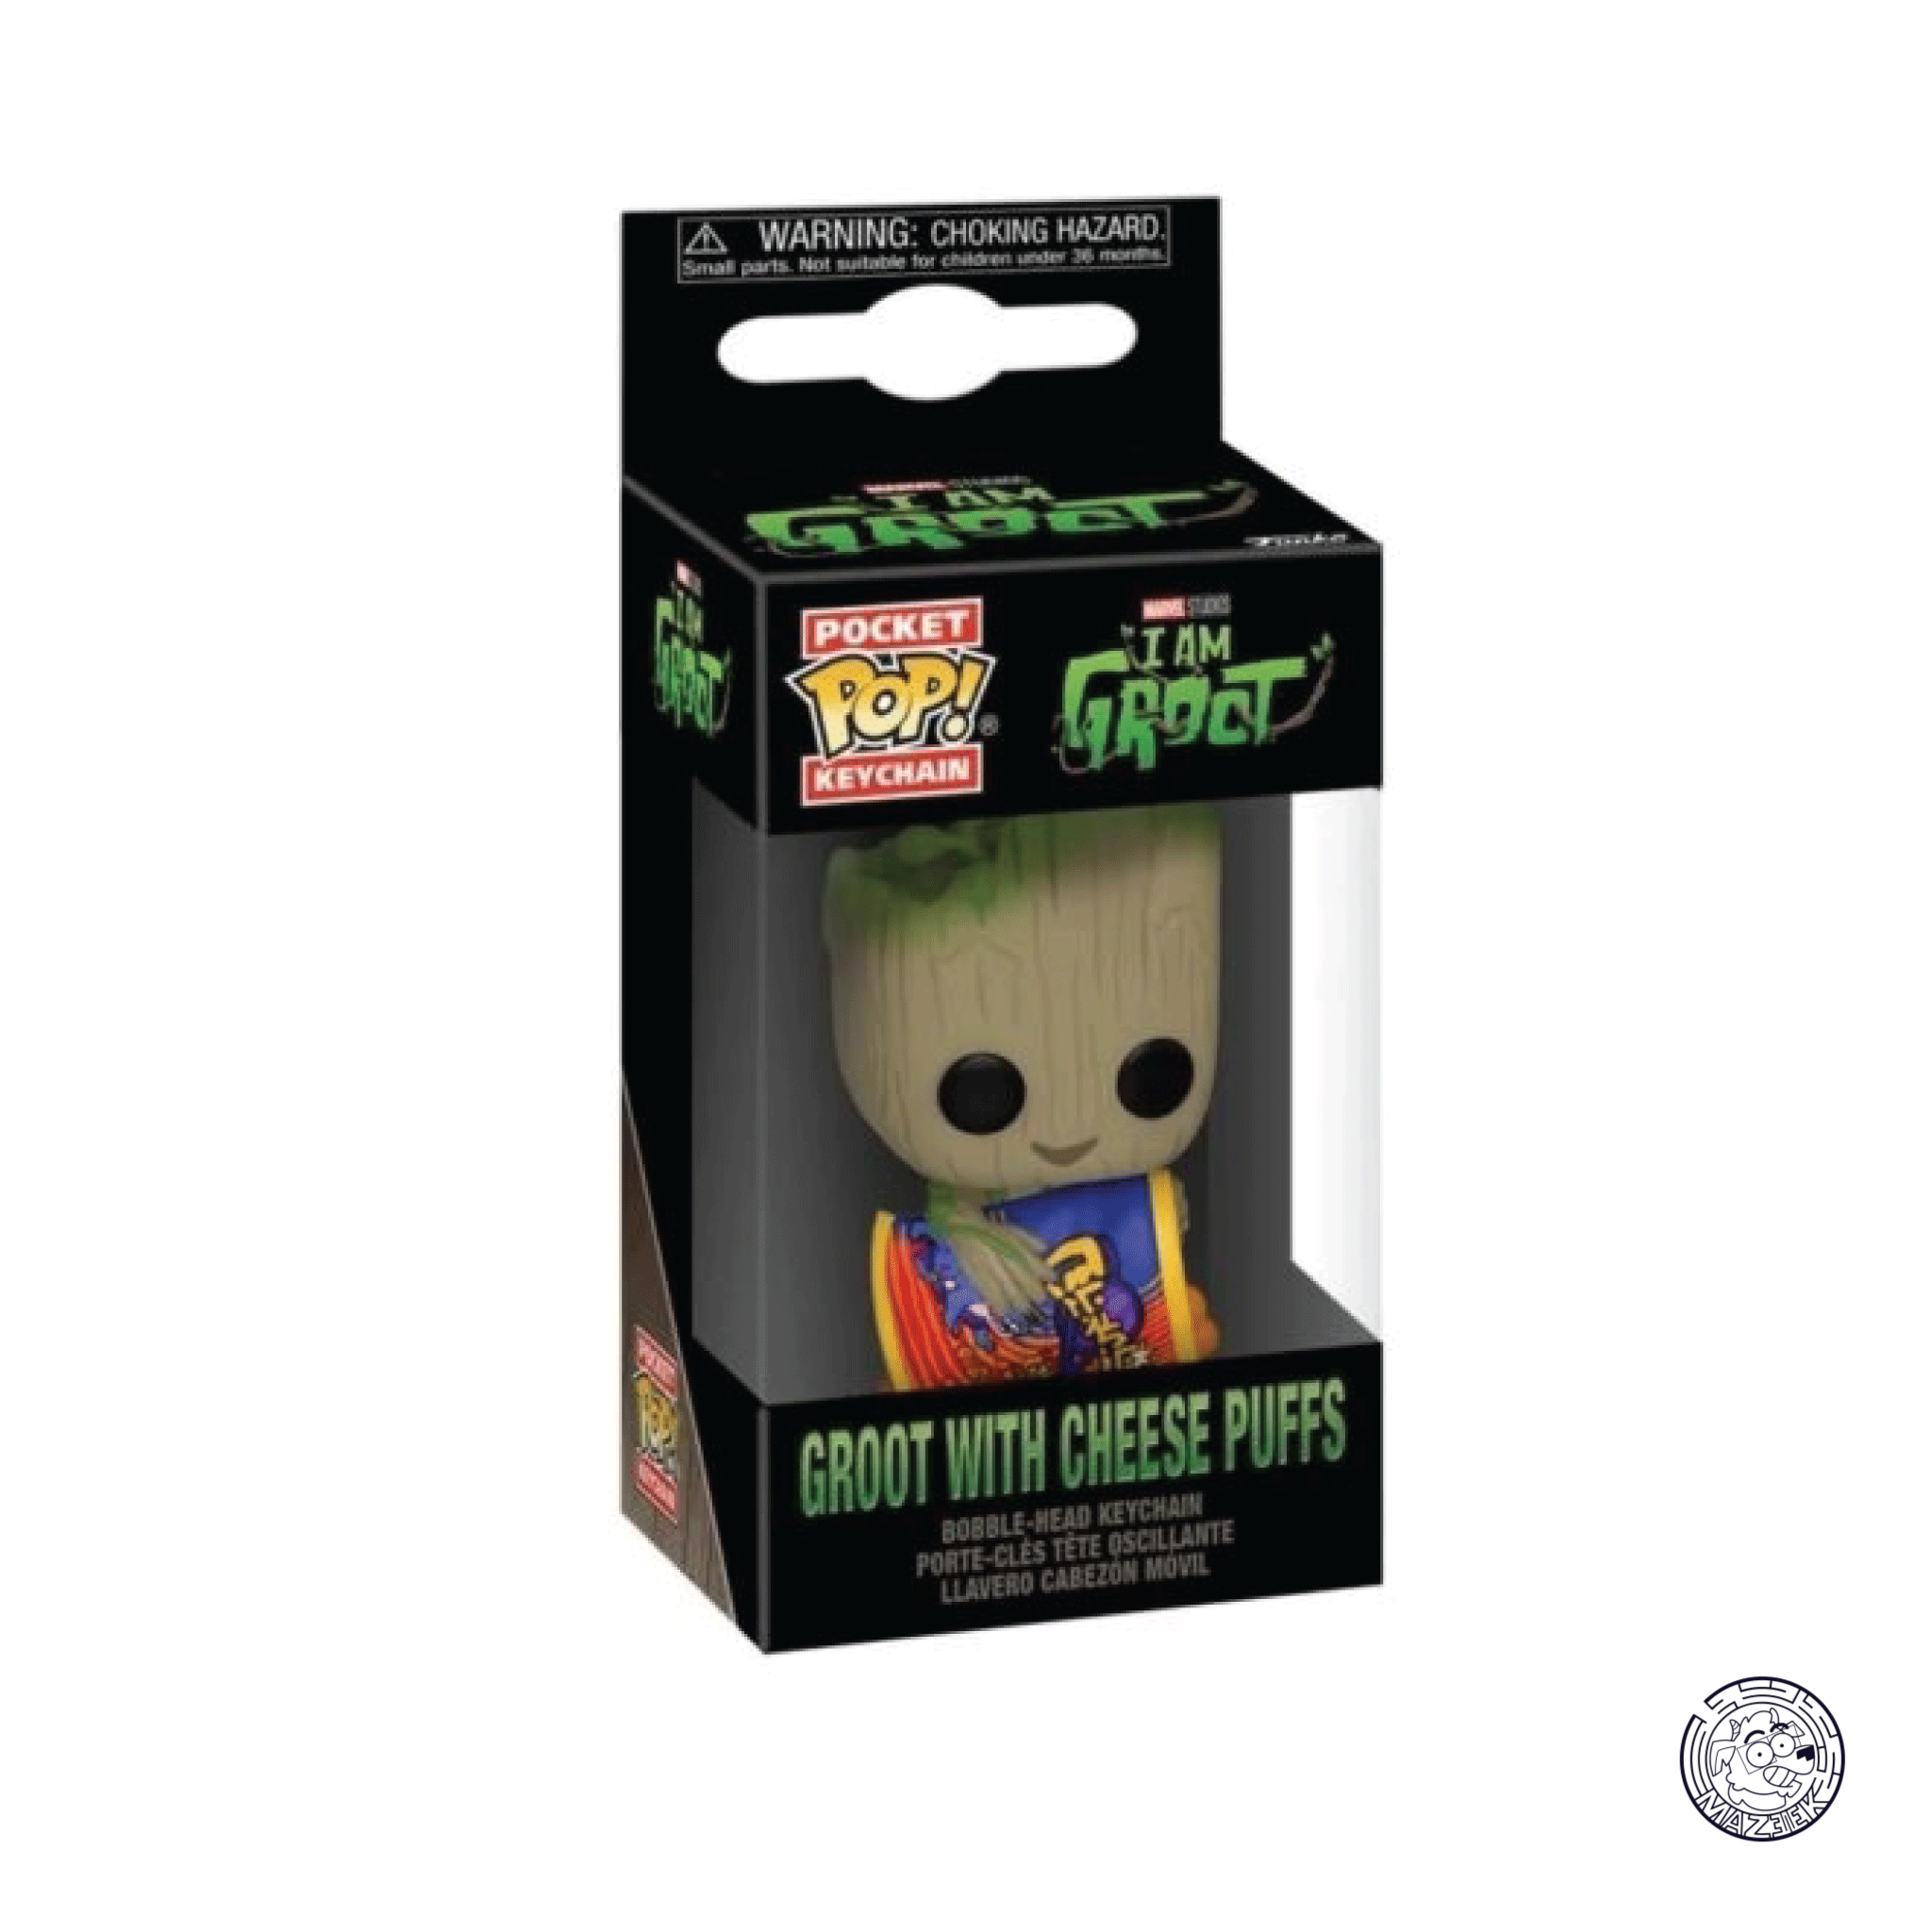 Pocket POP! Keychain I Am Groot: Groot with Cheese Puffs